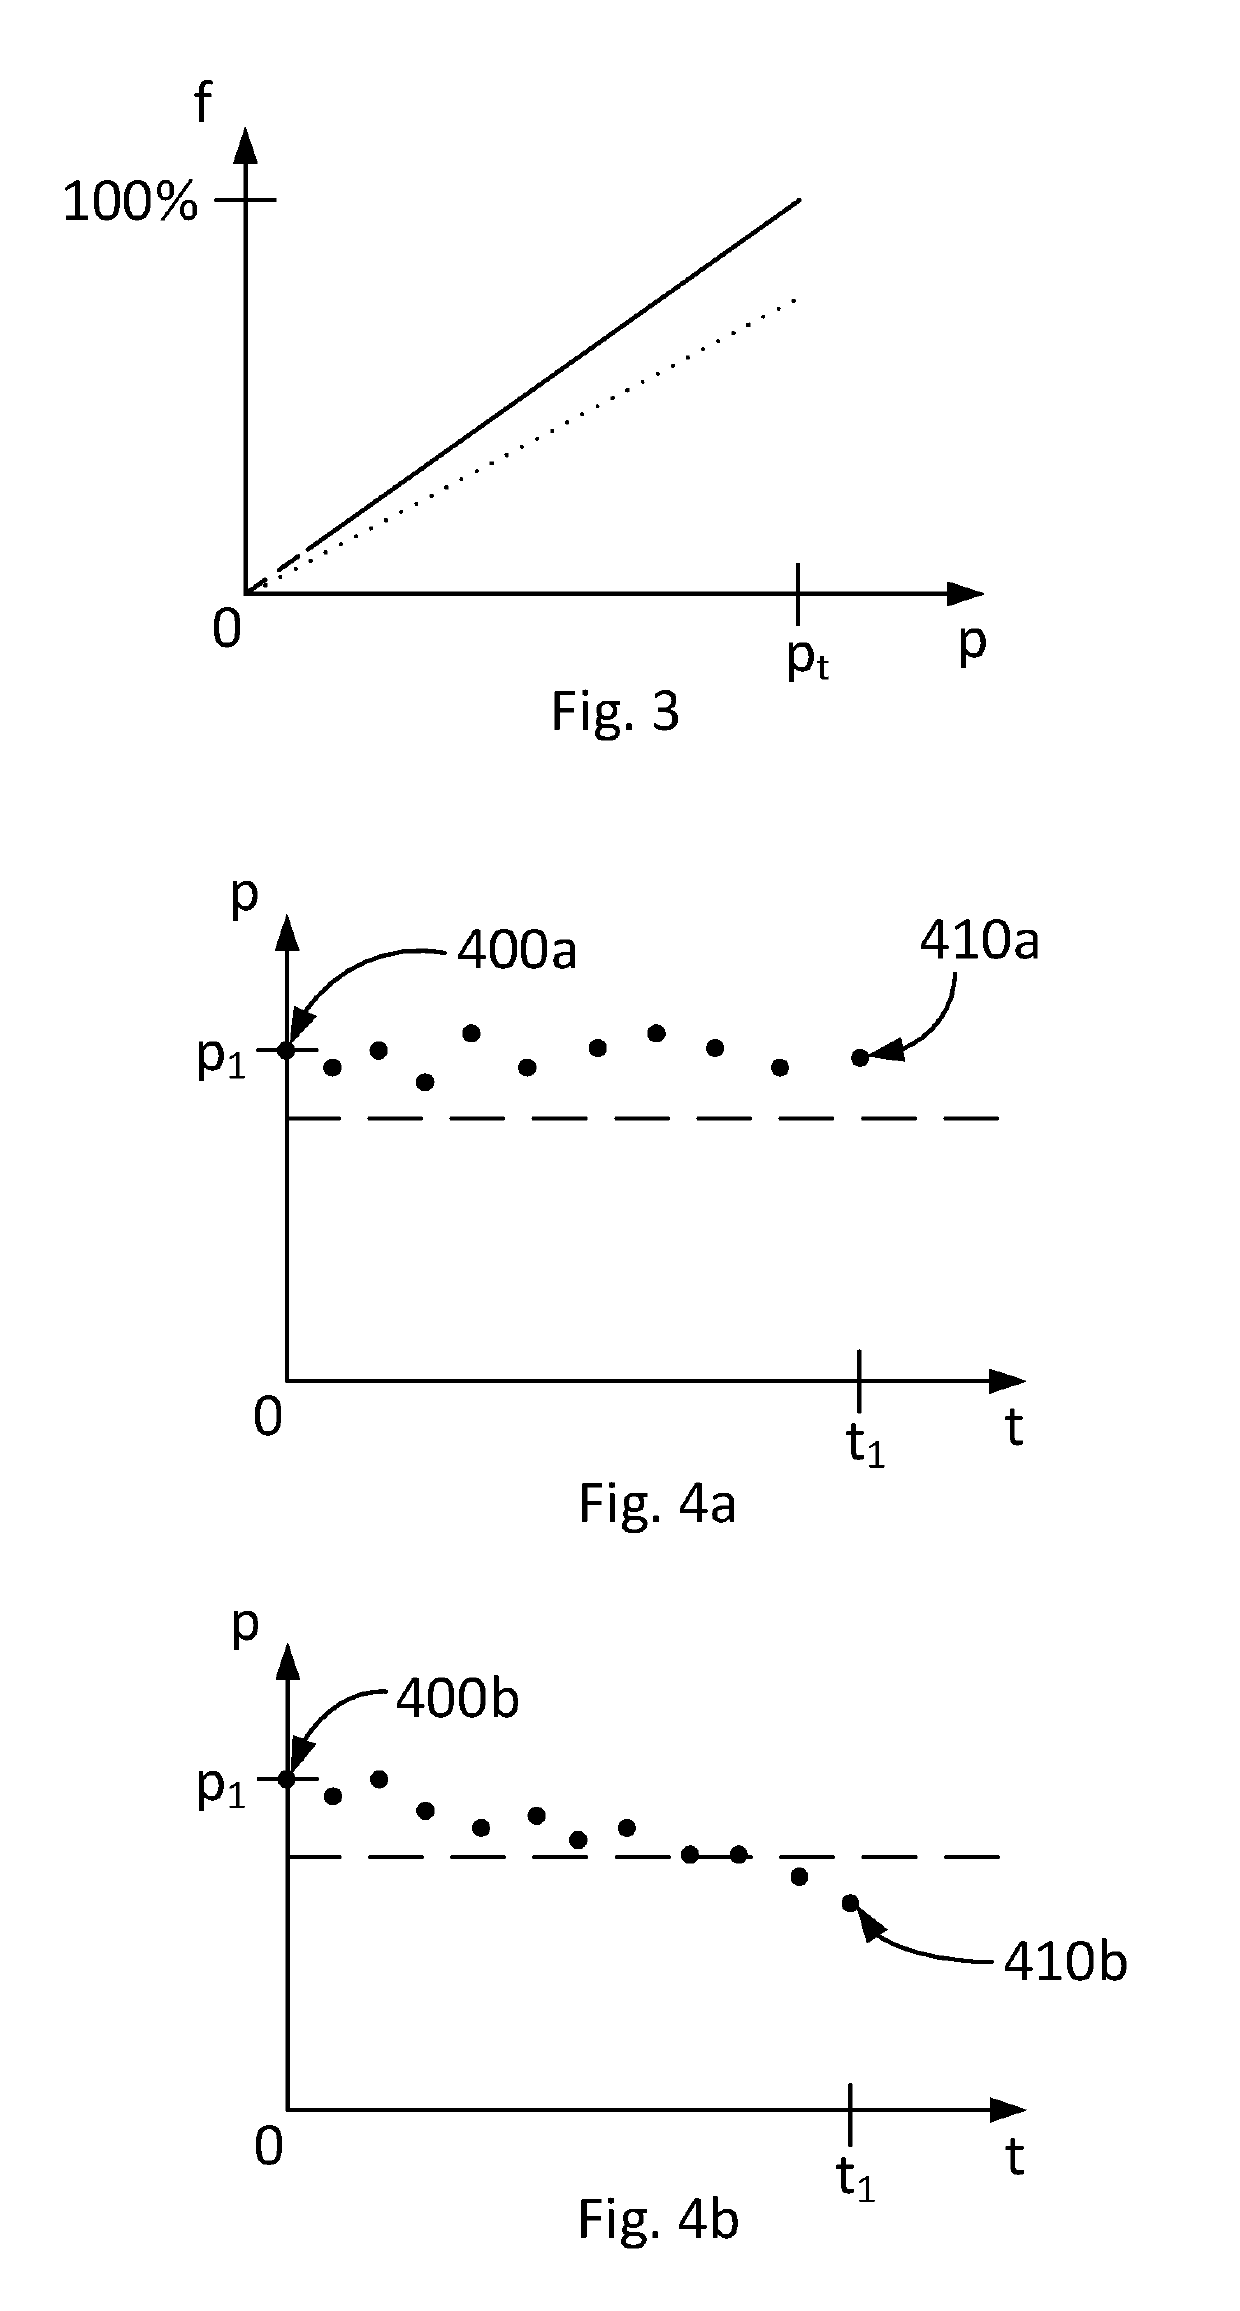 Method for determining the proper operation of a valve in a gas tank system